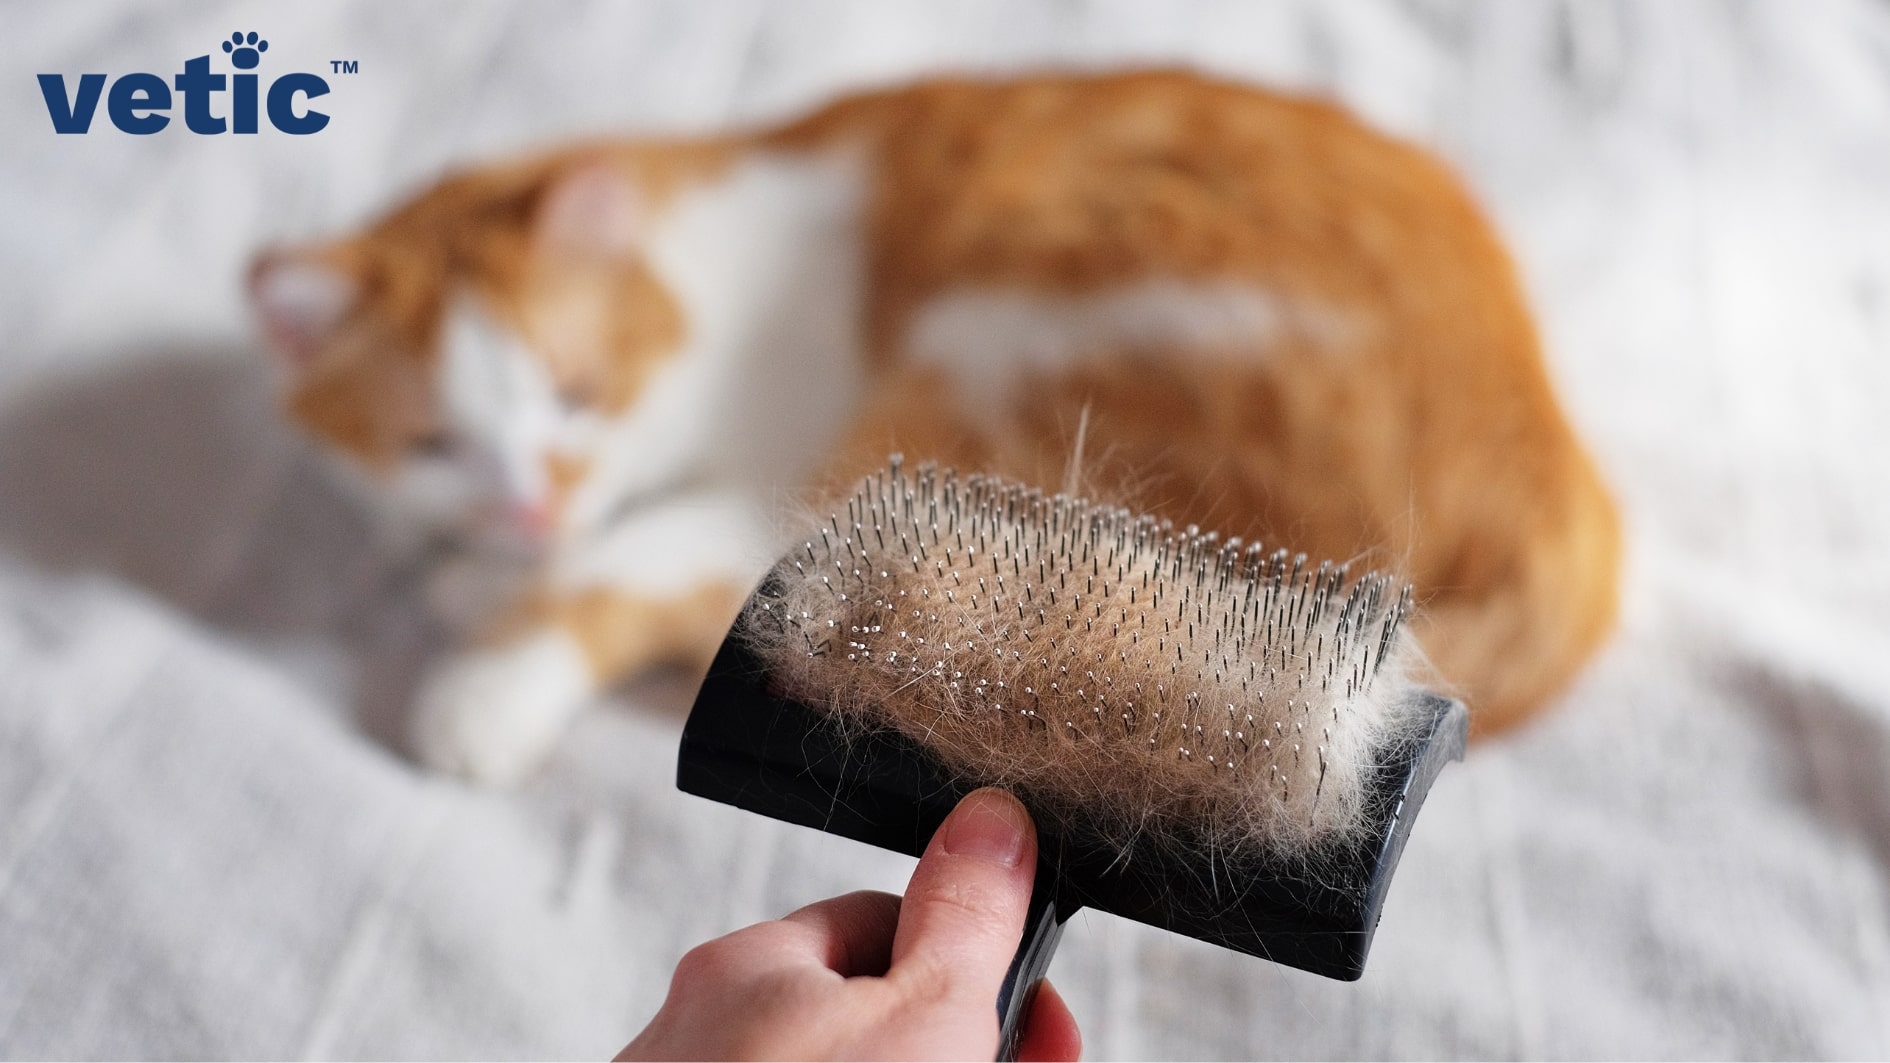 A woman's hand holding a cat hair brush in the focus of the camera. the brush has clumps of orange and white fur probably caused by the shedding of the orange-white cat in the background. The quantity of fur due to shedding in cats is normal. the cat is out of focus, sitting on a white bedsheet.